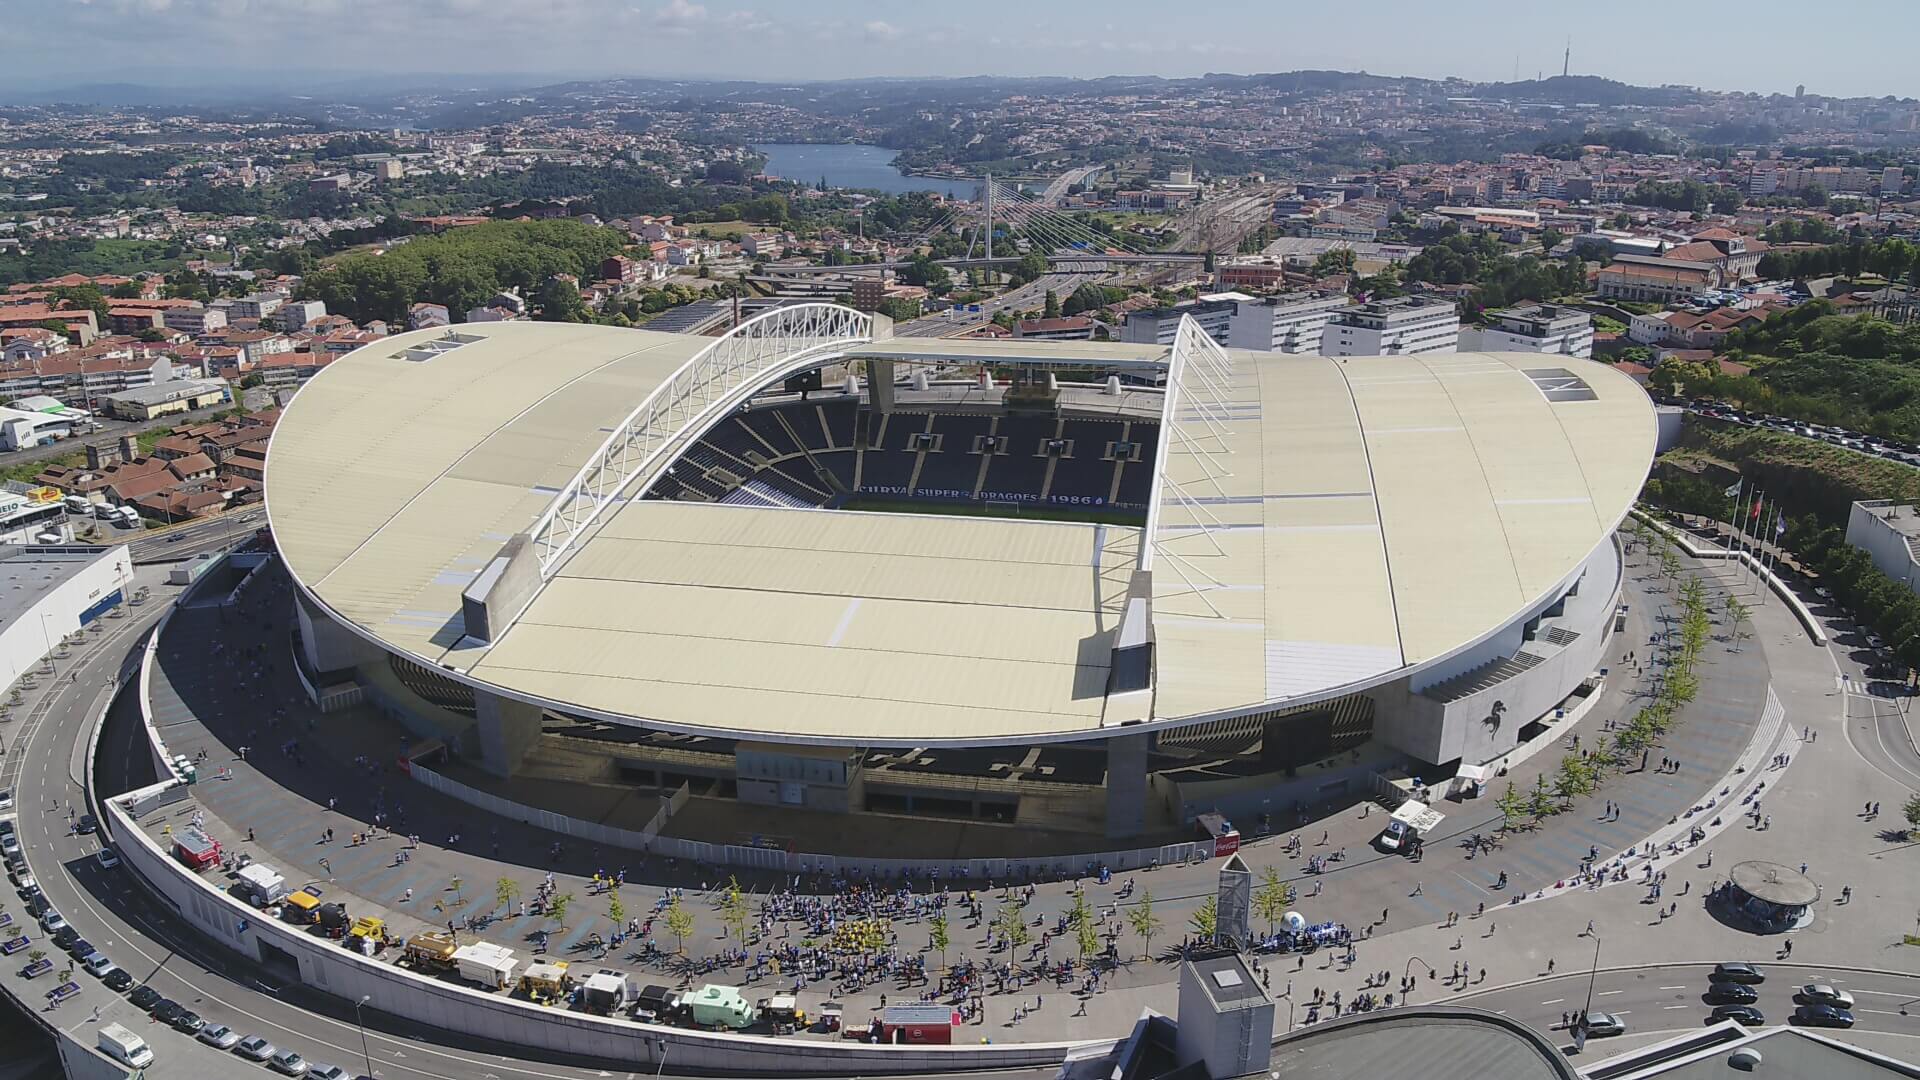 To our surprise, admittance at the Estádio do Dragão, Porto's home turf, found great value in the Portal.